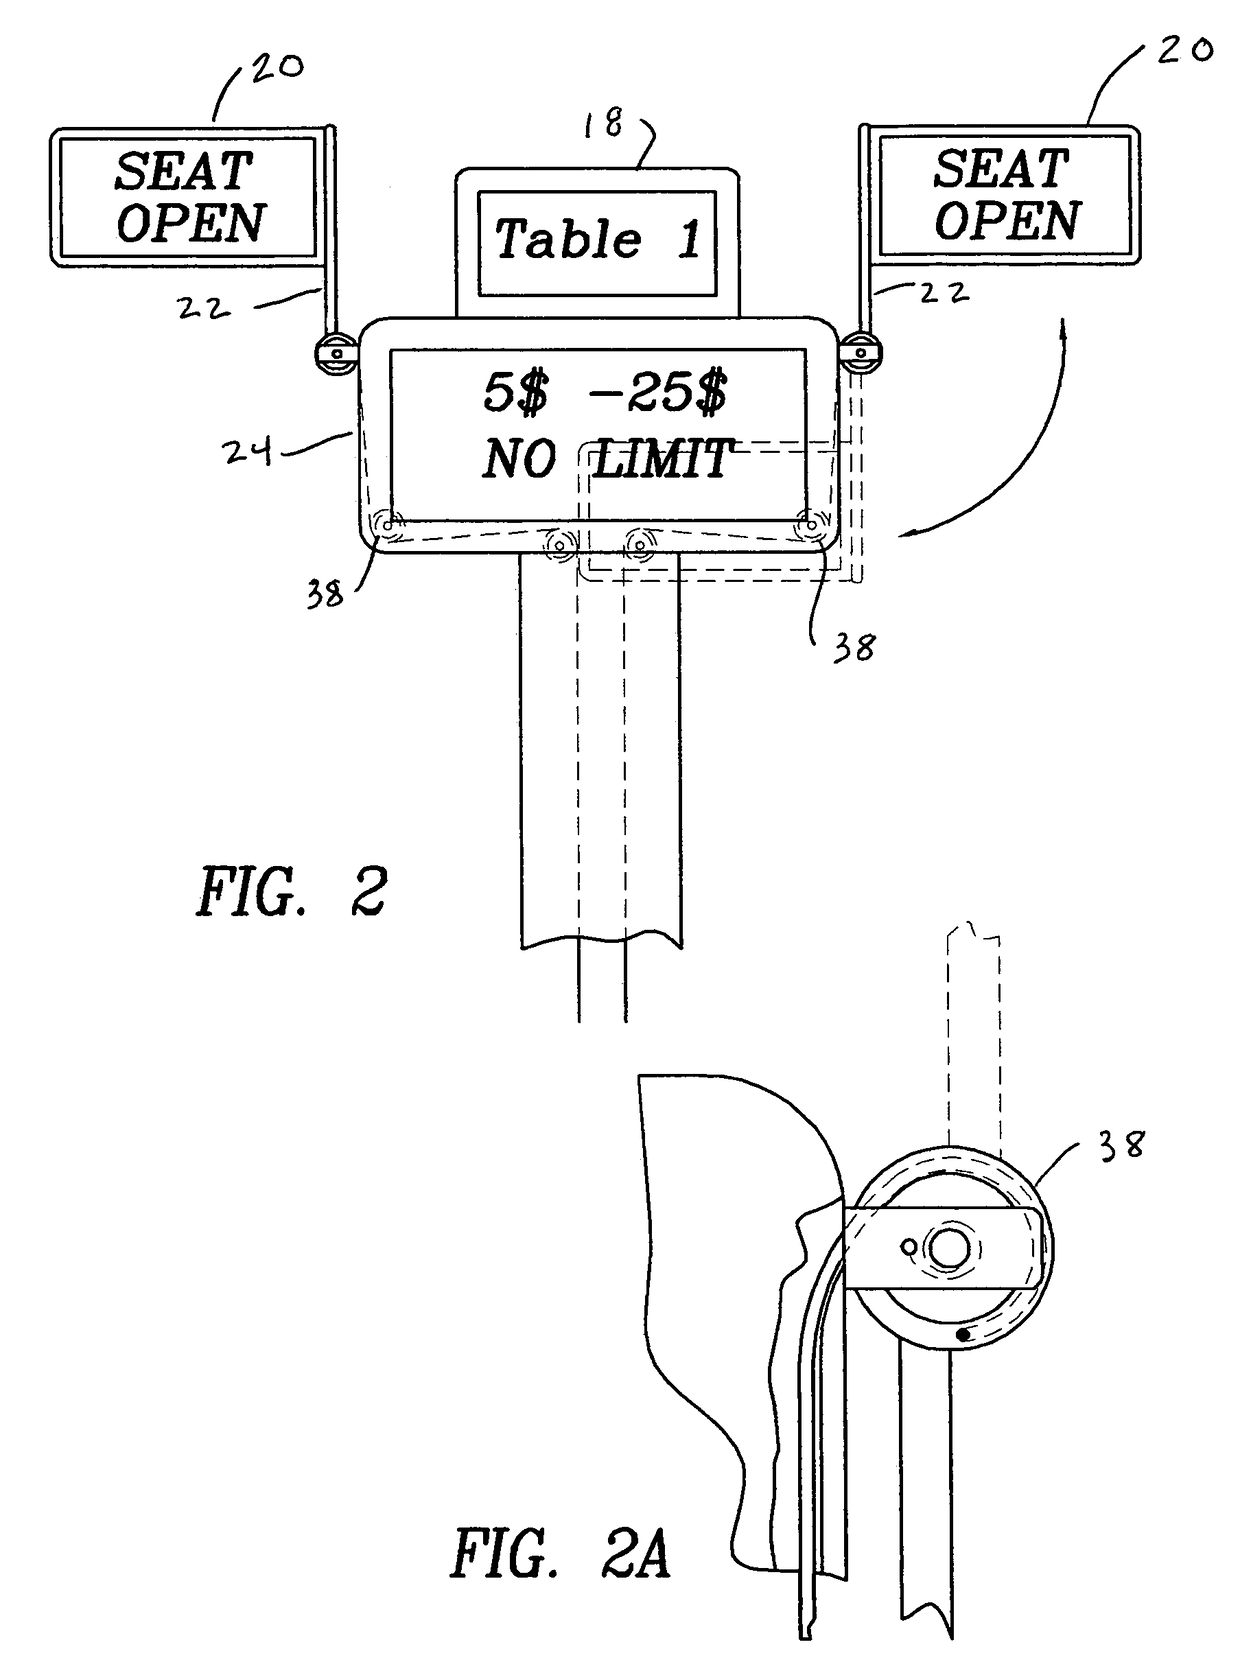 Apparatus for alerting availability of vacant poker table seats